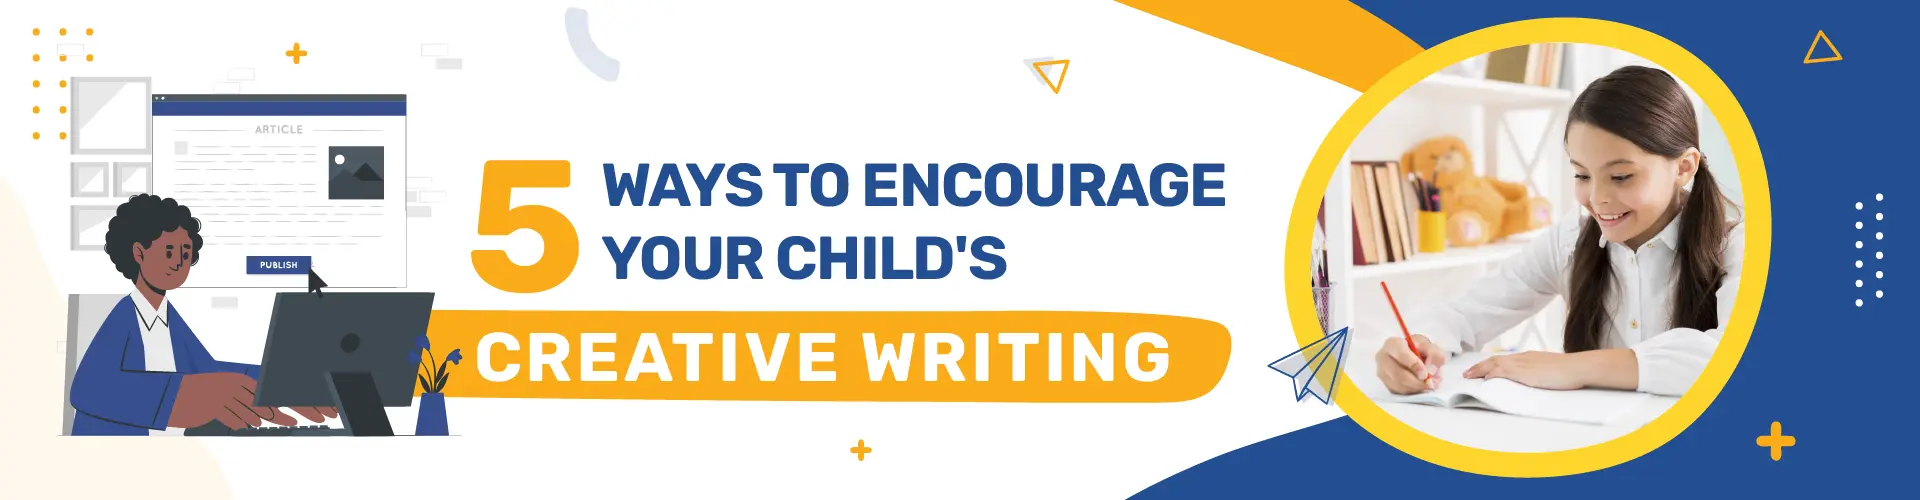 Encourage Your Child's Creative Writing